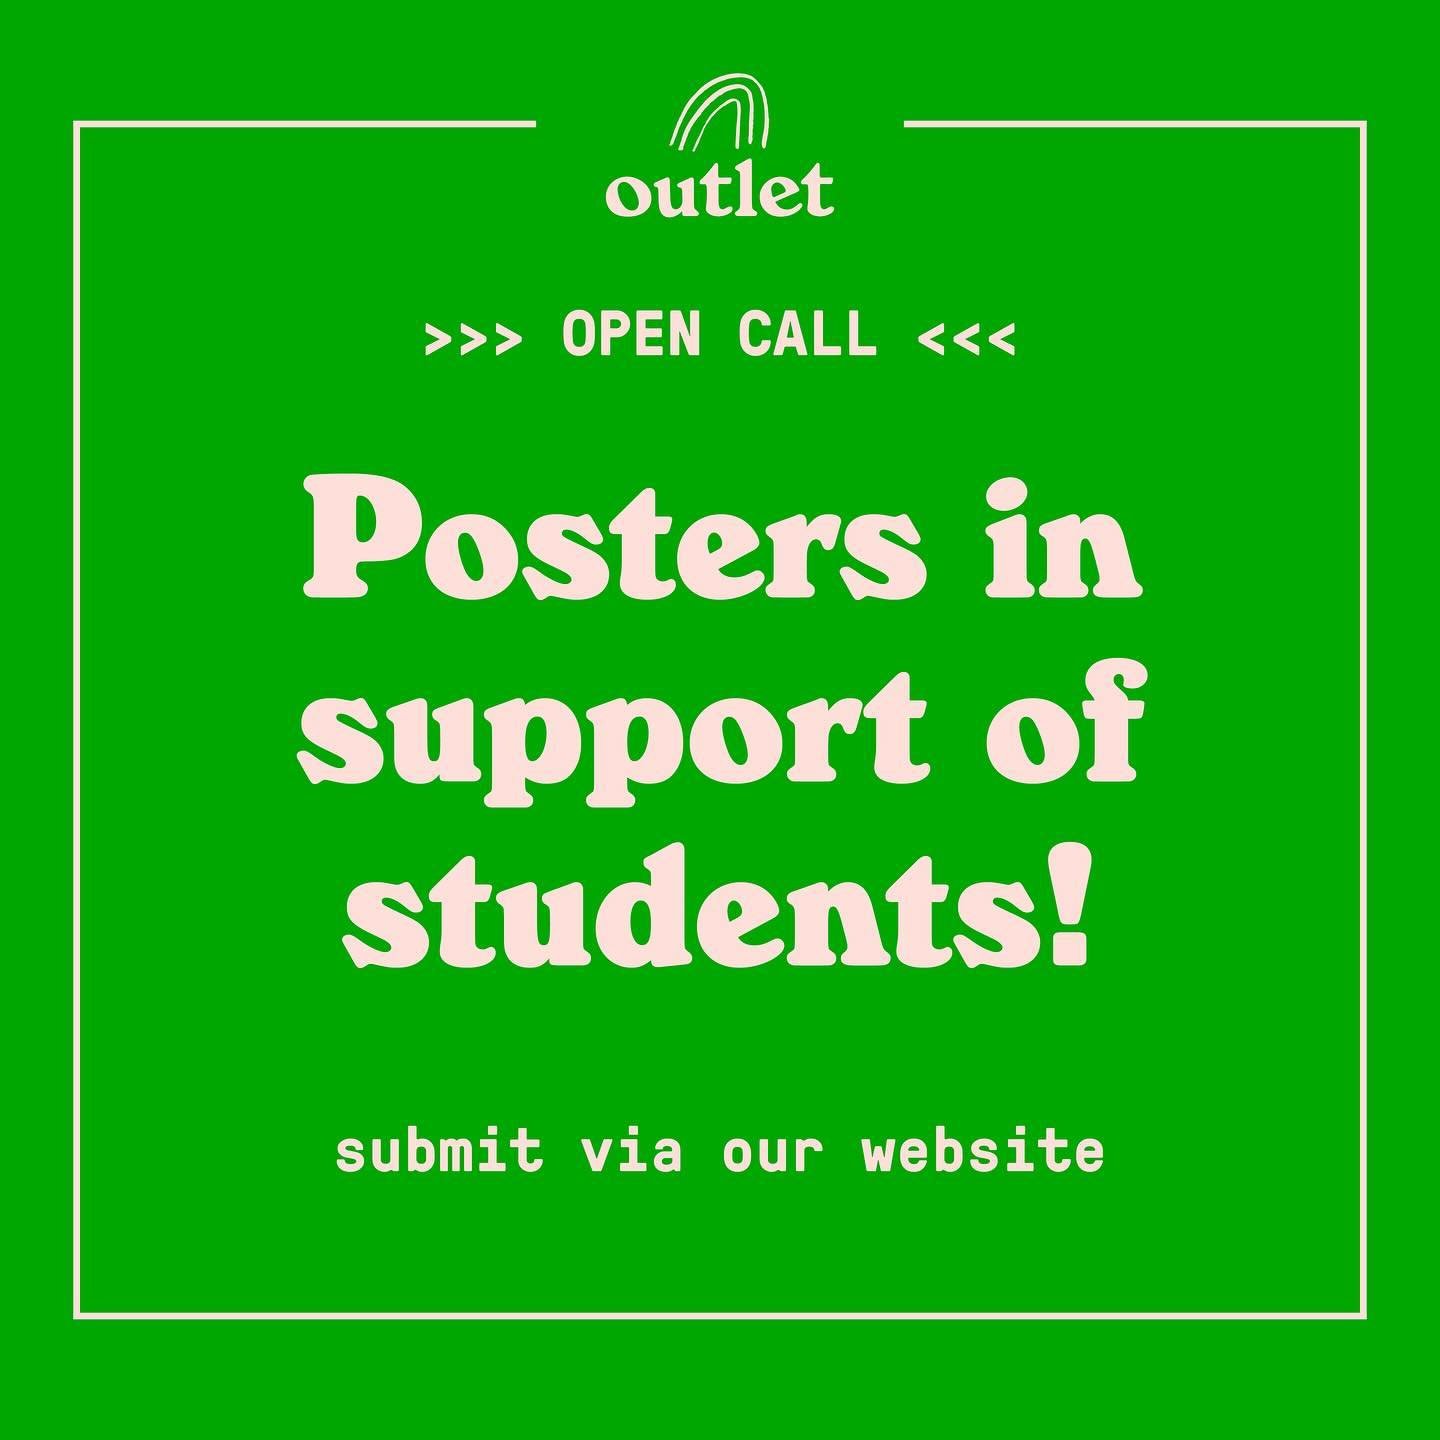 Outlet stands in solidarity with @psu_super and students across the country opposed to genocide and in support of Palestinian liberation. This is an open call for protest poster submissions in support of students and others protesting on PSU campus. 